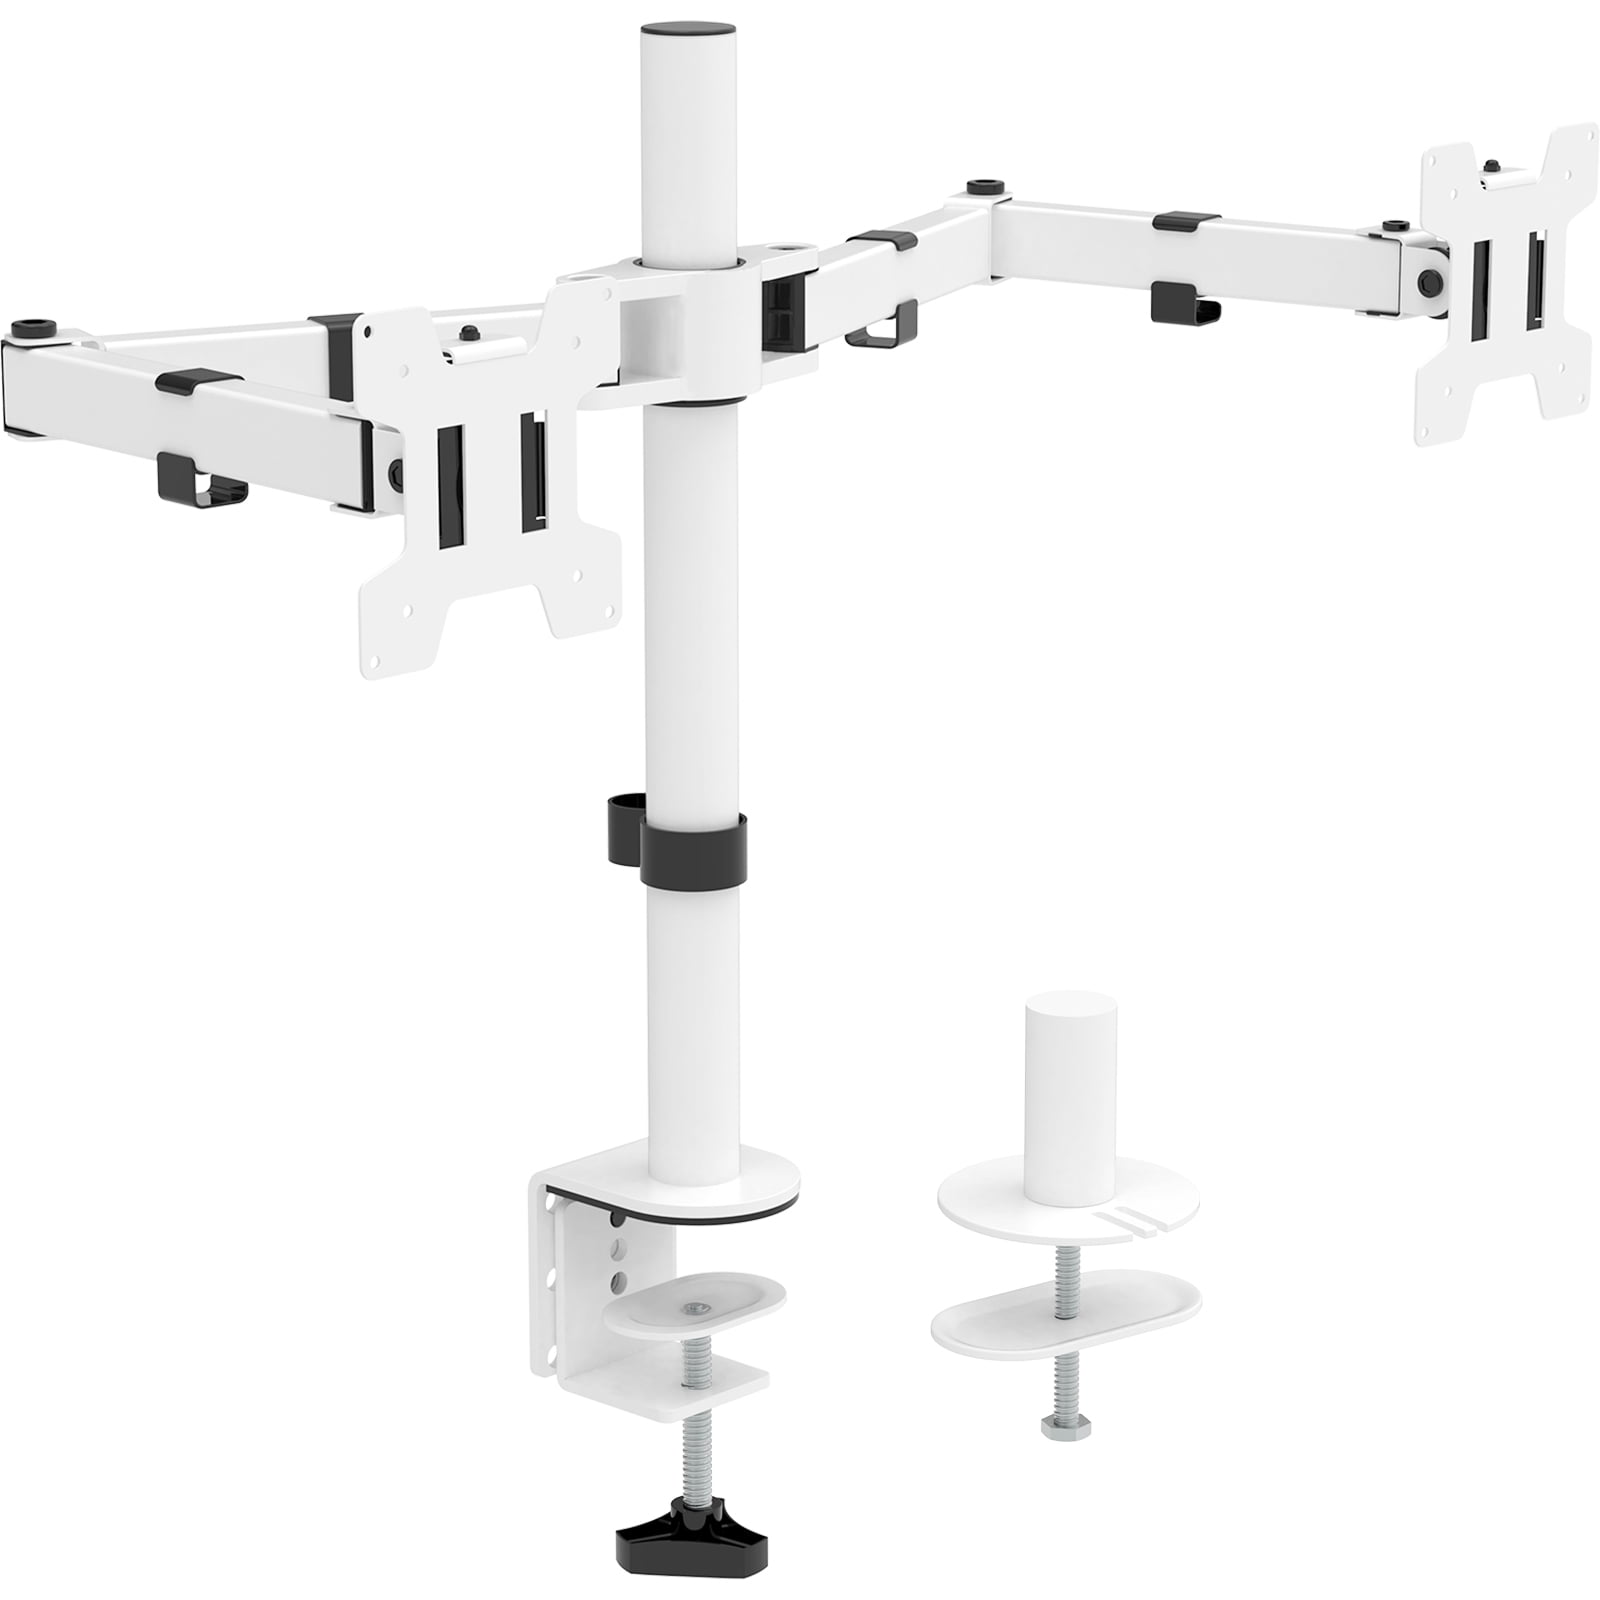 WALI Dual LCD Monitor Fully Adjustable Desk Mount Stand Fits 2